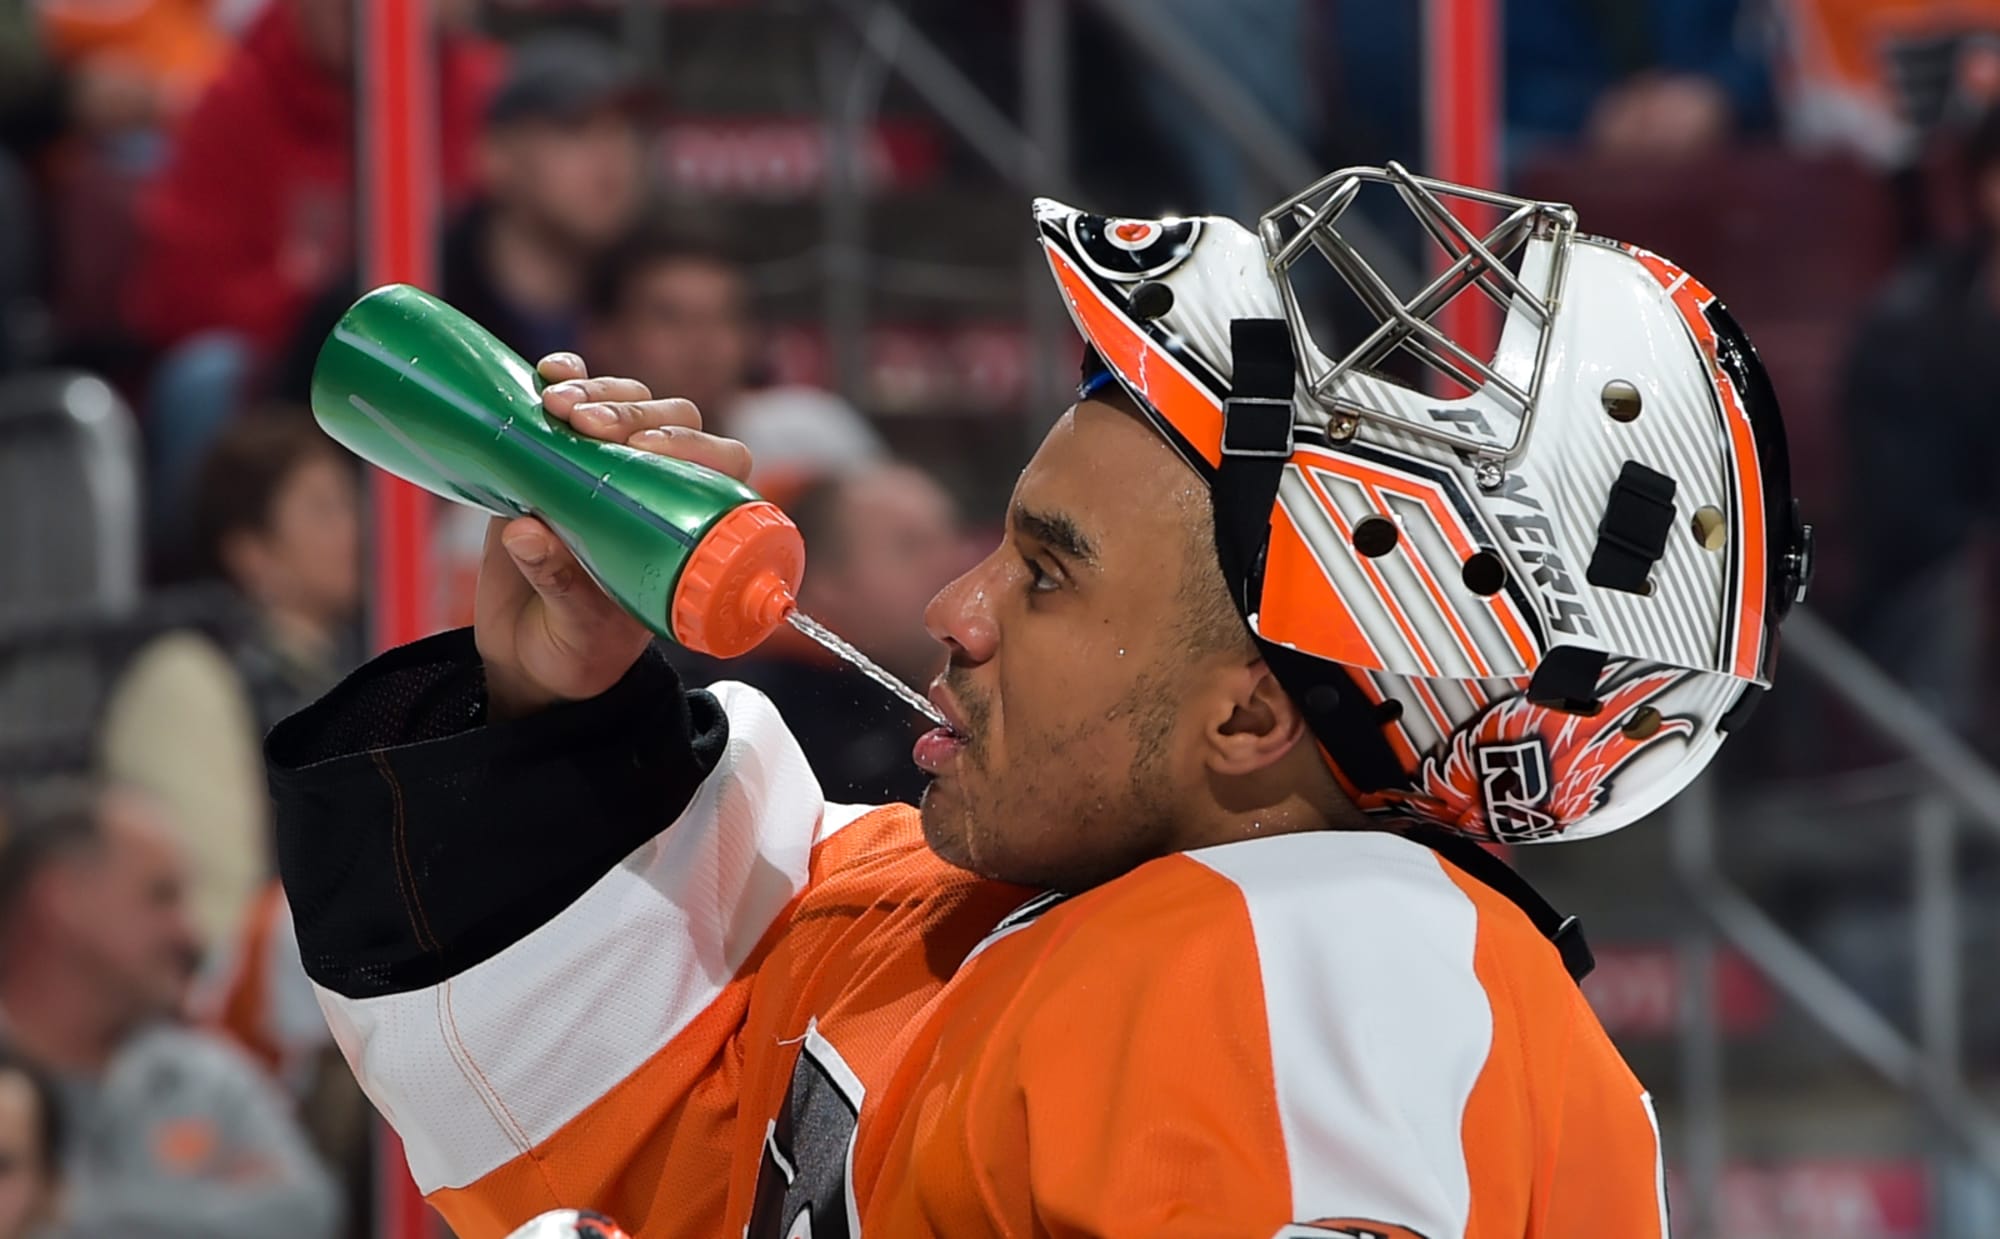 Ray Emery signs one-year contract with Flyers 